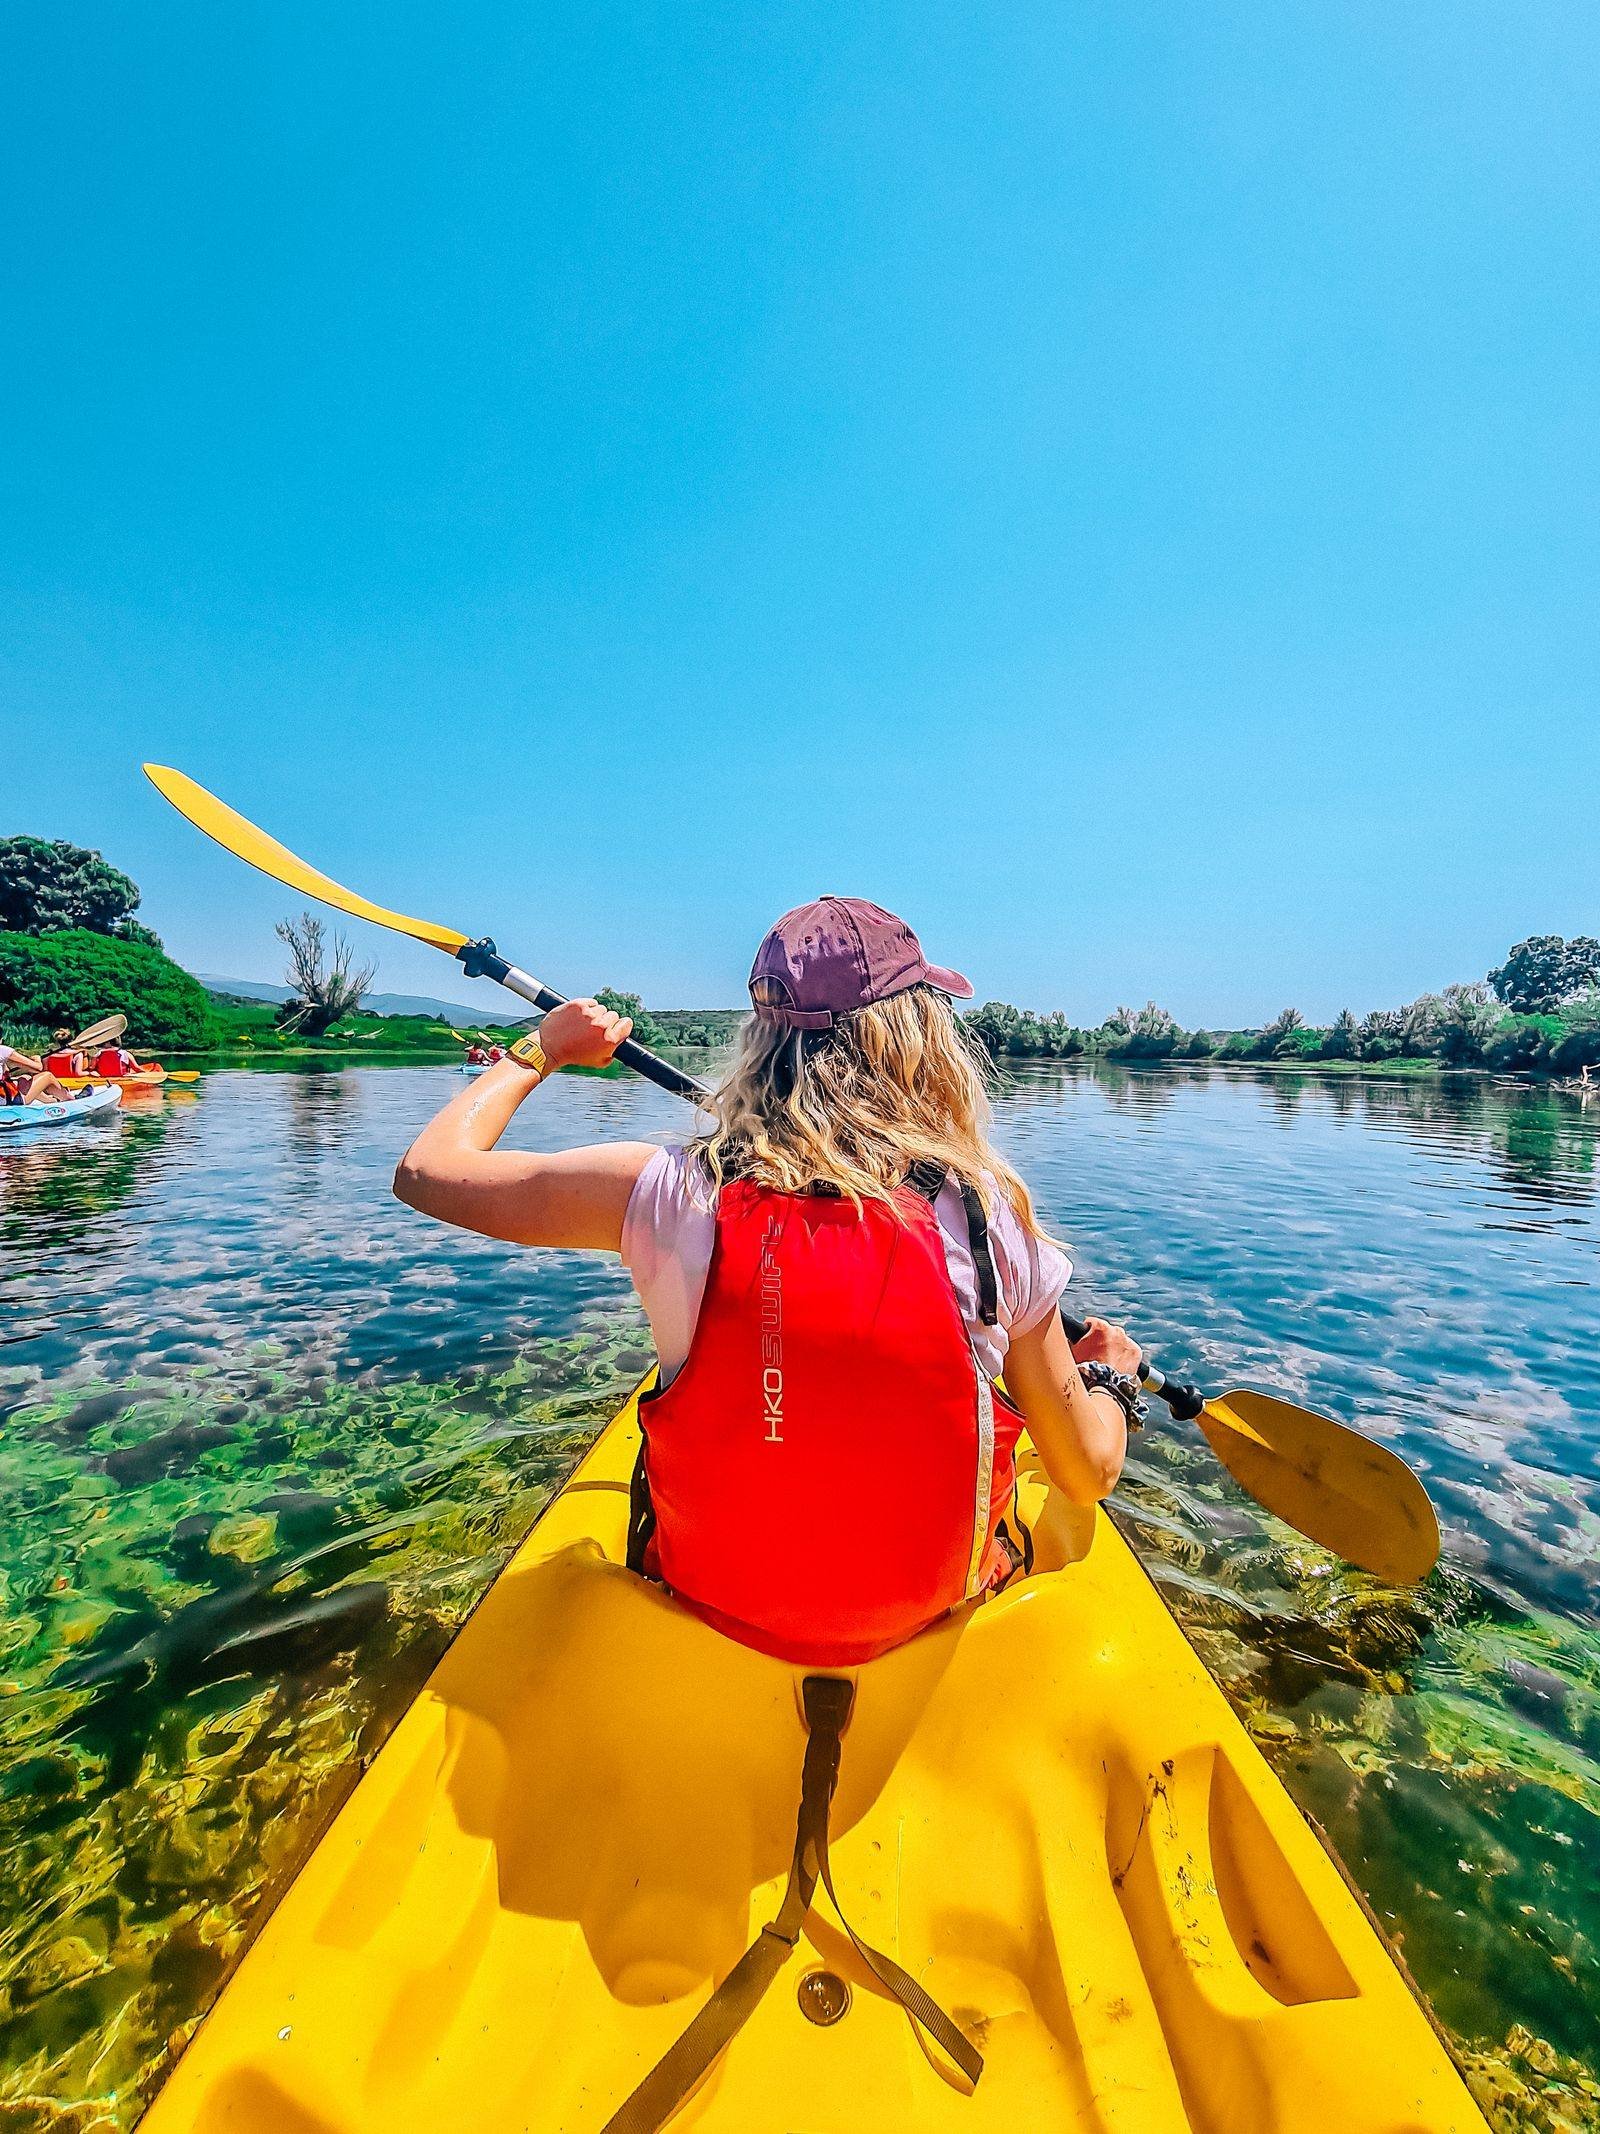 back of a girl wearing a red lifevest and sitting in a yellow kayak with both hands on a paddle, paddling down a rive rin the sun